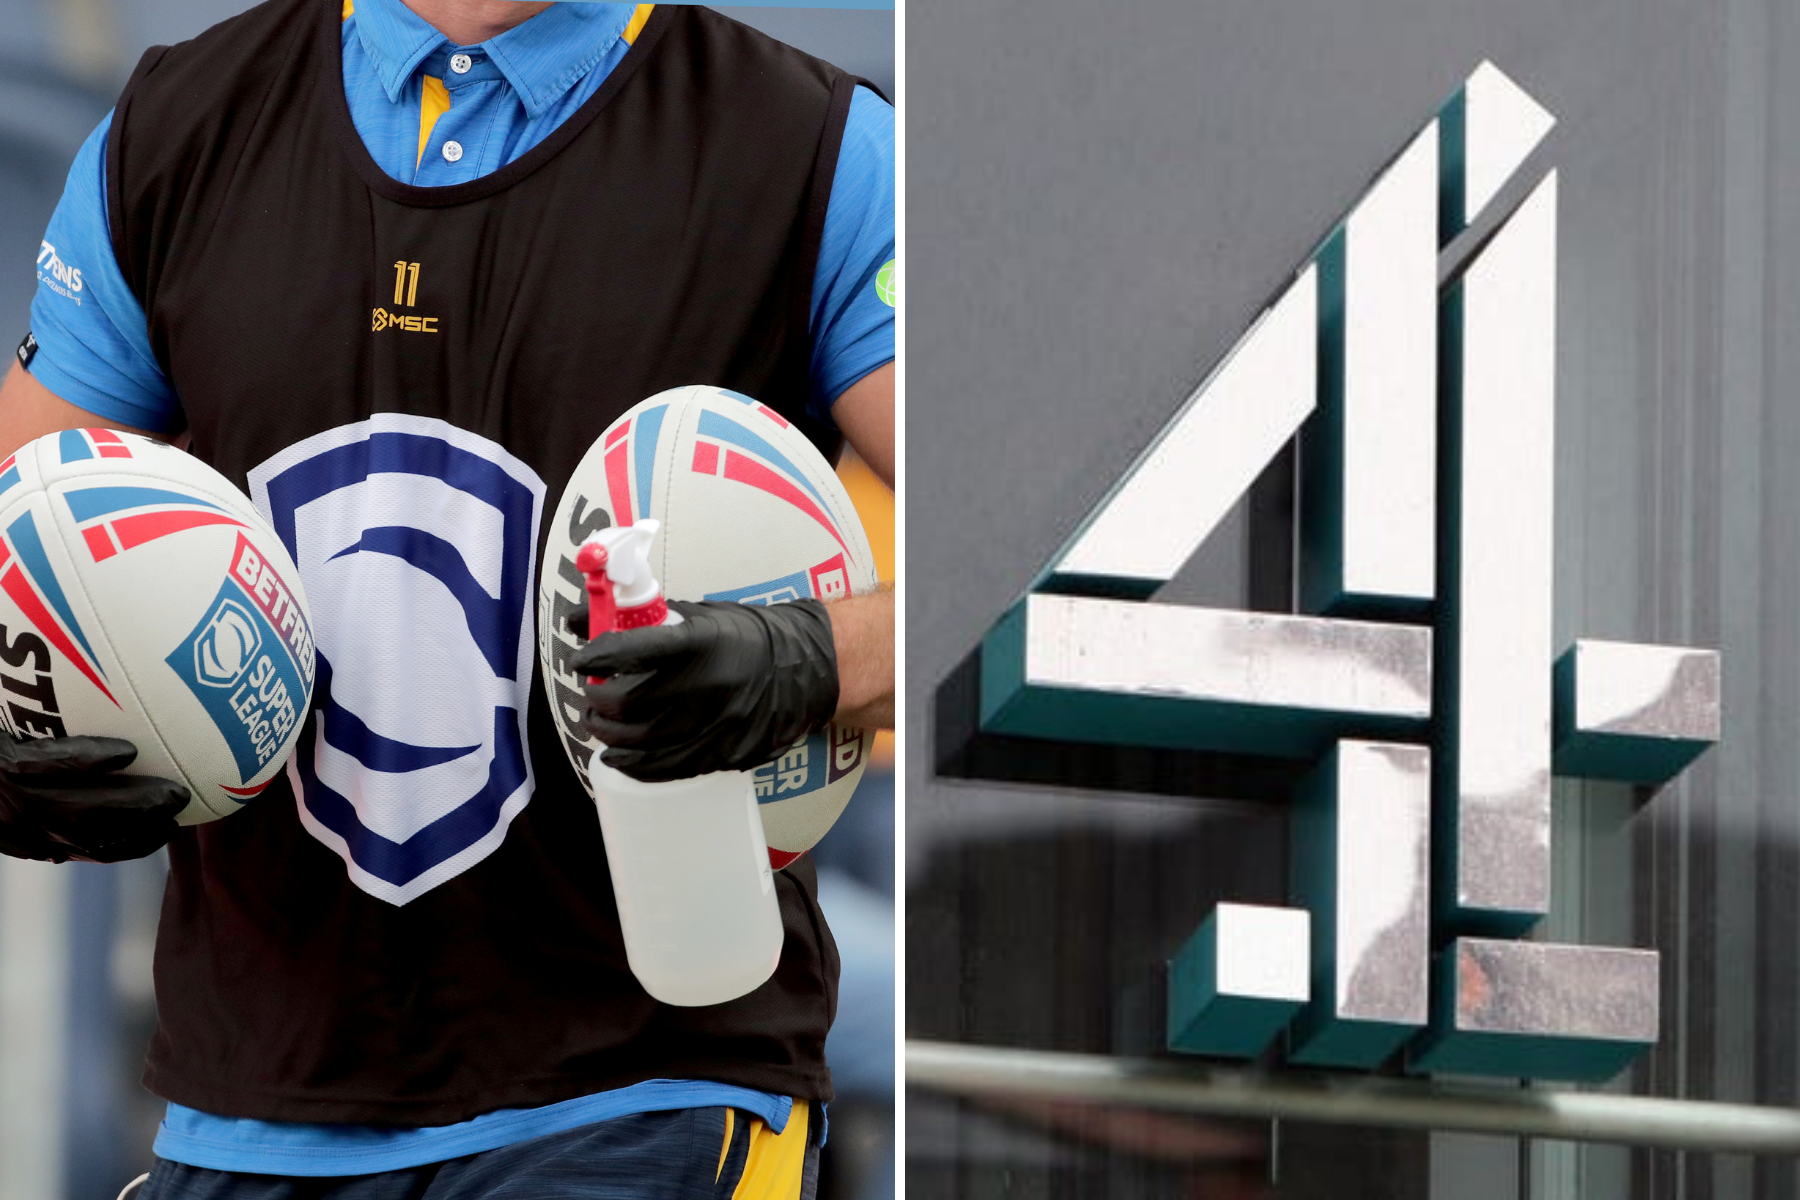 Rugby Super League to air on Channel 4 for first time in its history